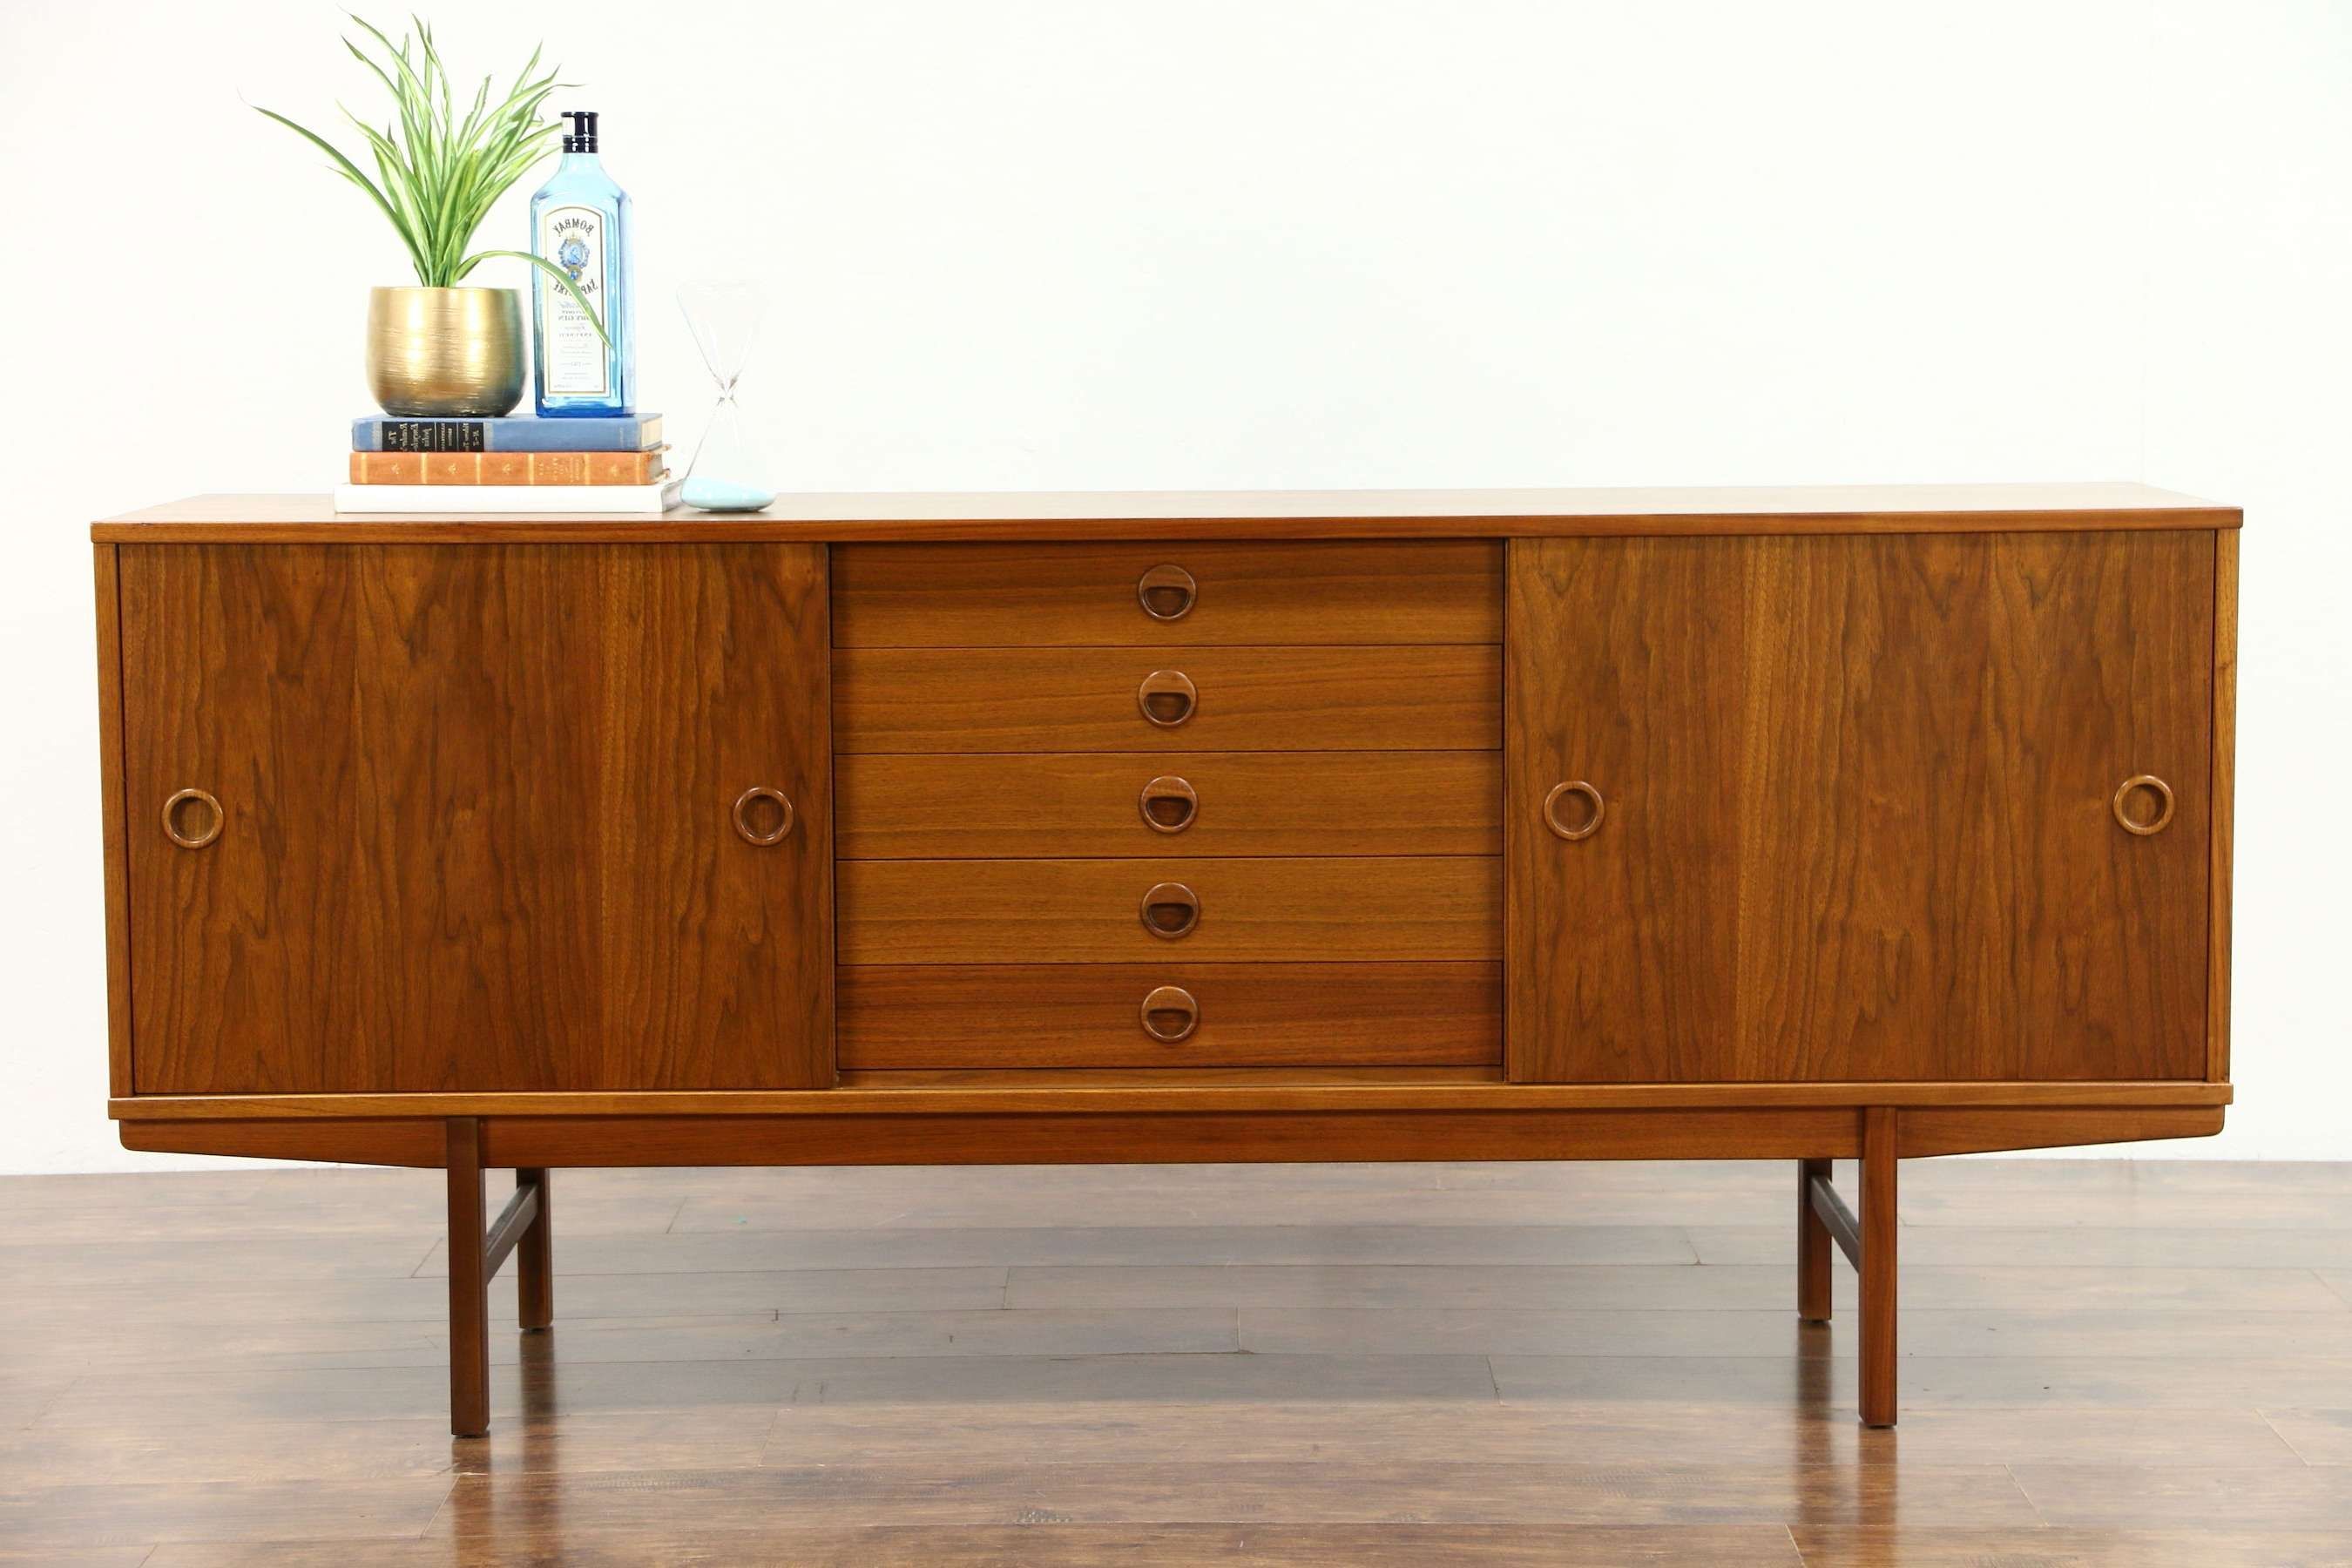 Sold – Midcentury Modern 1960's Teak Credenza, Sideboard, Tv Throughout Credenza Sideboards (View 2 of 20)